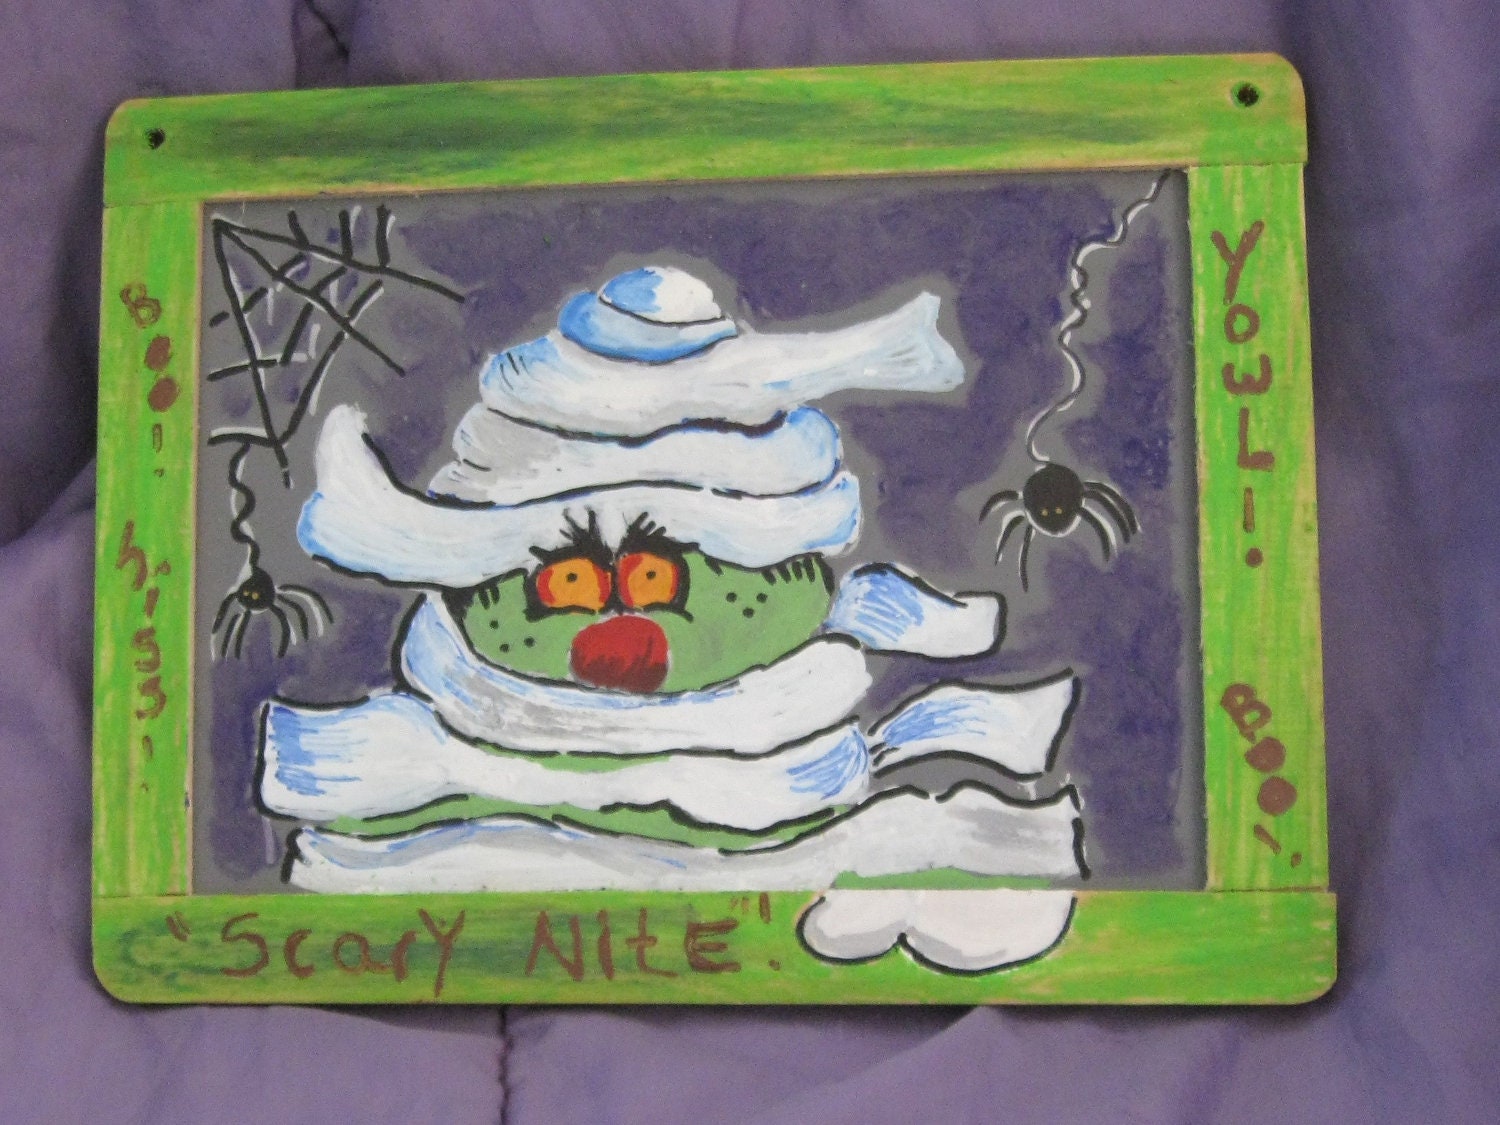 Halloween wall hanging, Spooky Nite, a Small painted chalkboard